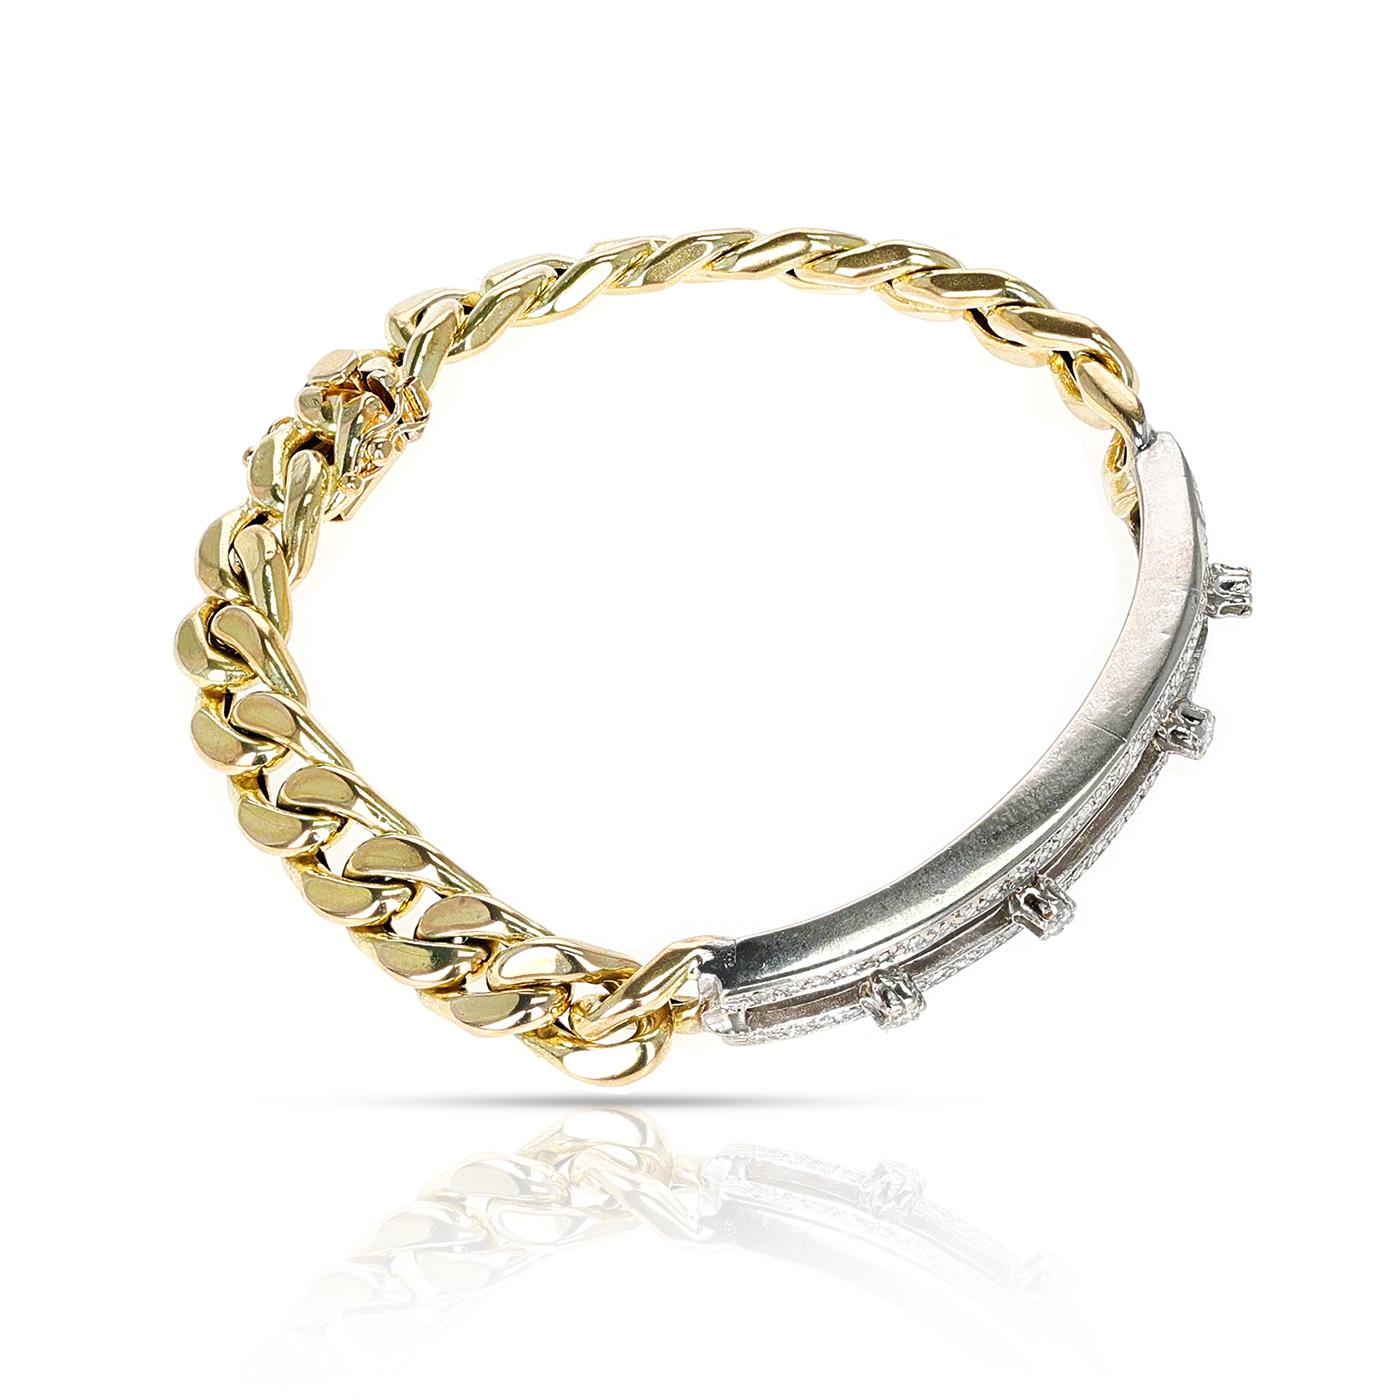 A 14k Yellow and White Gold with Diamonds Chain Men's Bracelet. The length of the bracelet is 7.50 inches.  